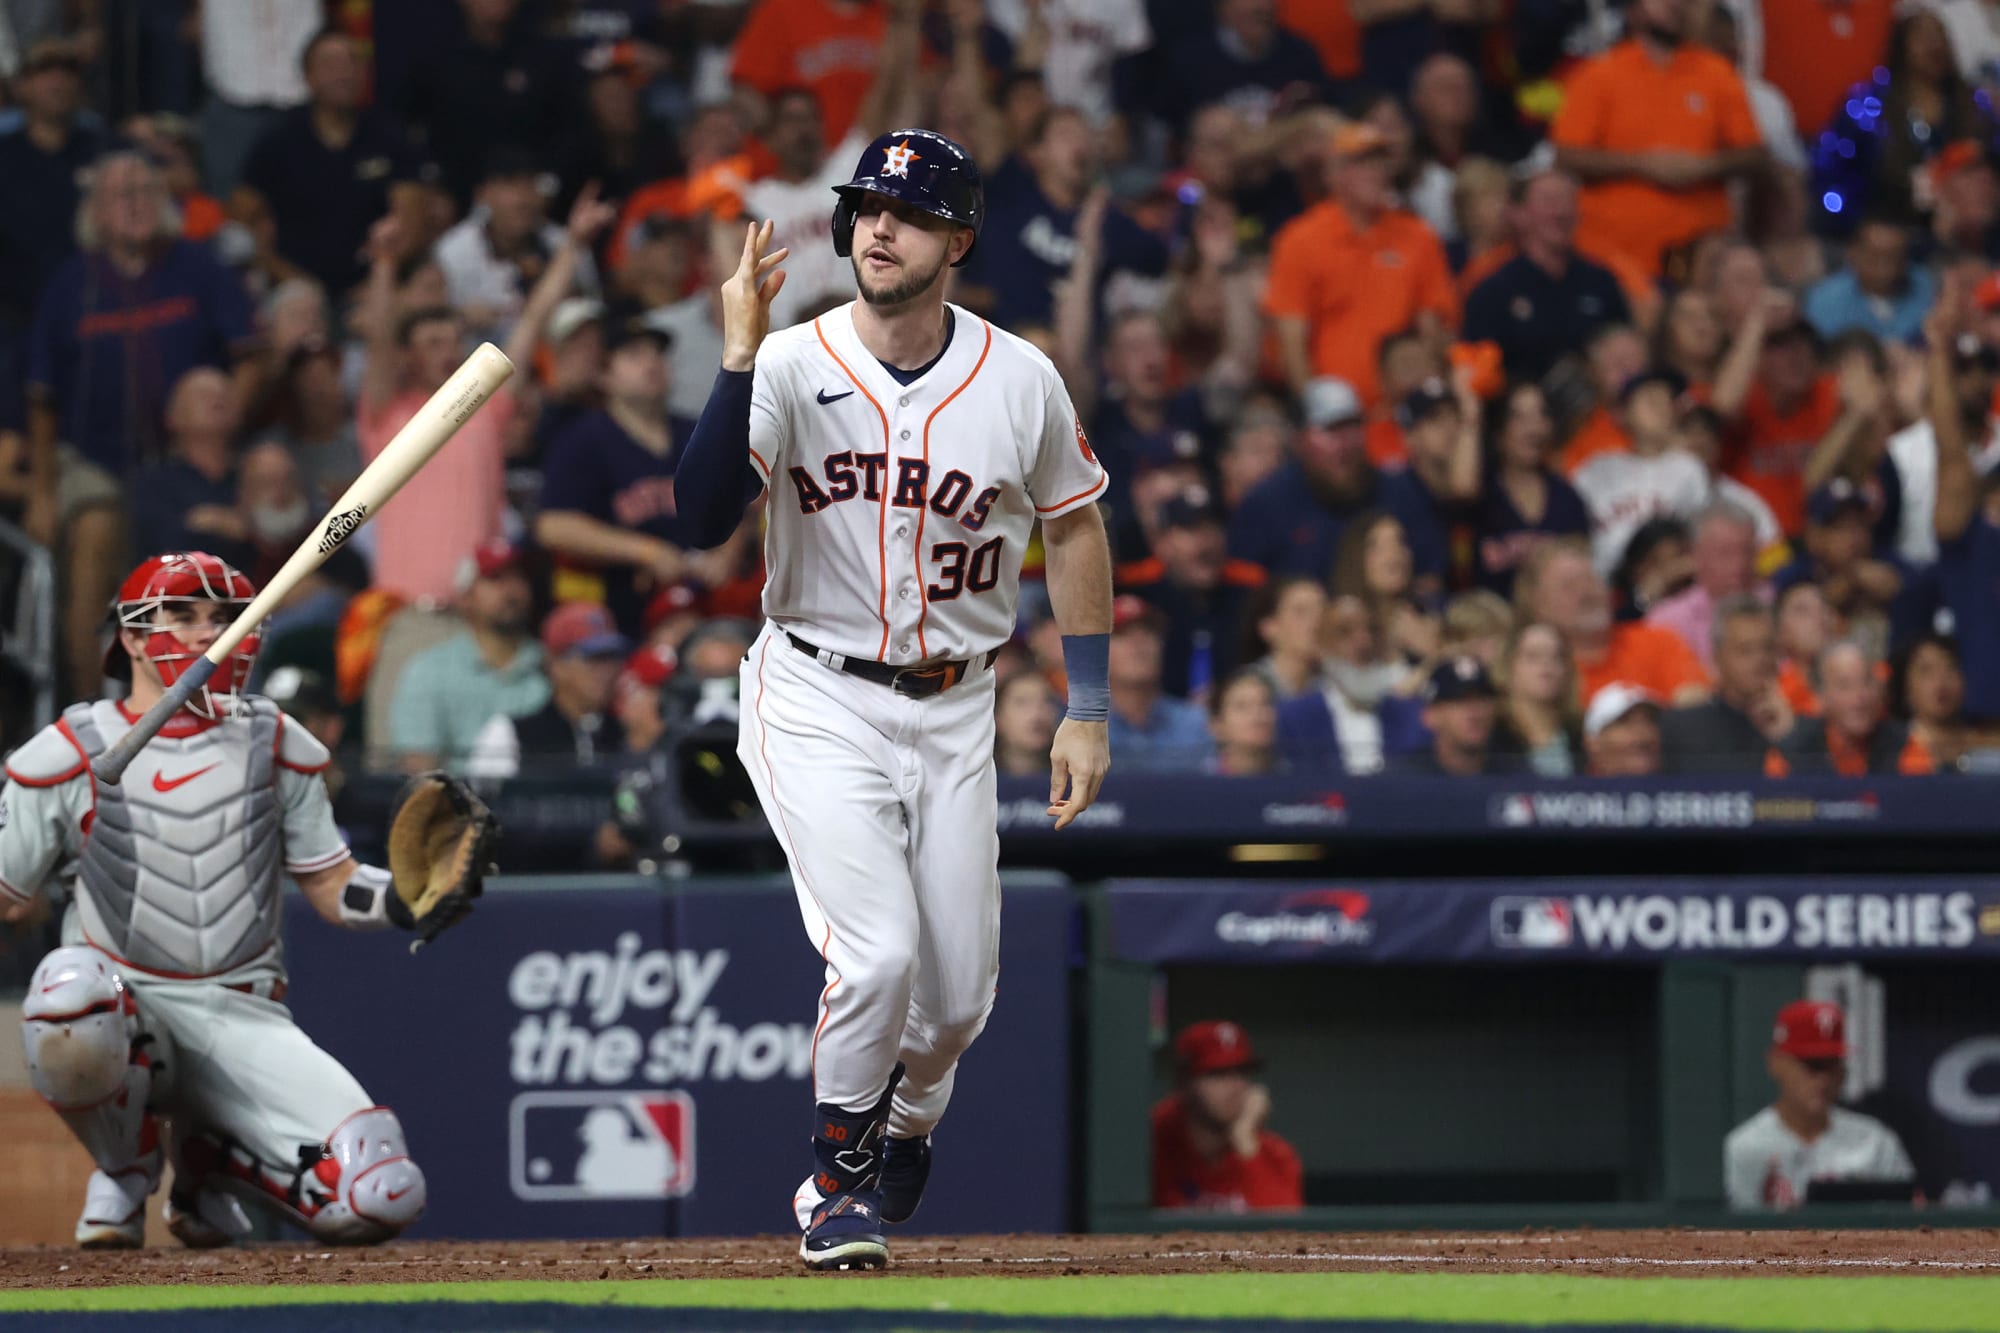 Kyle Tucker owns Game 1 Watch Astros home runs from all angles (Video)